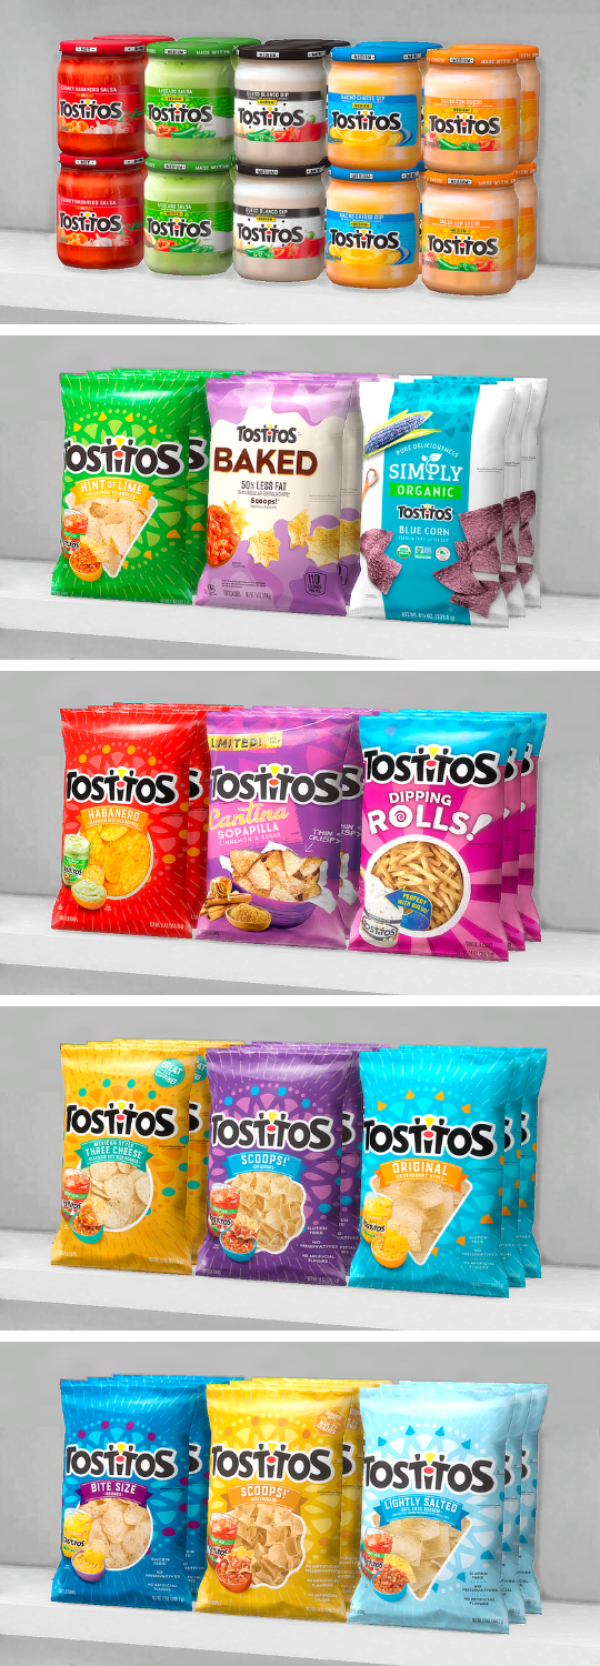 342074 tostitos set 40 singles bulk 41 by coatisims sims4 featured image